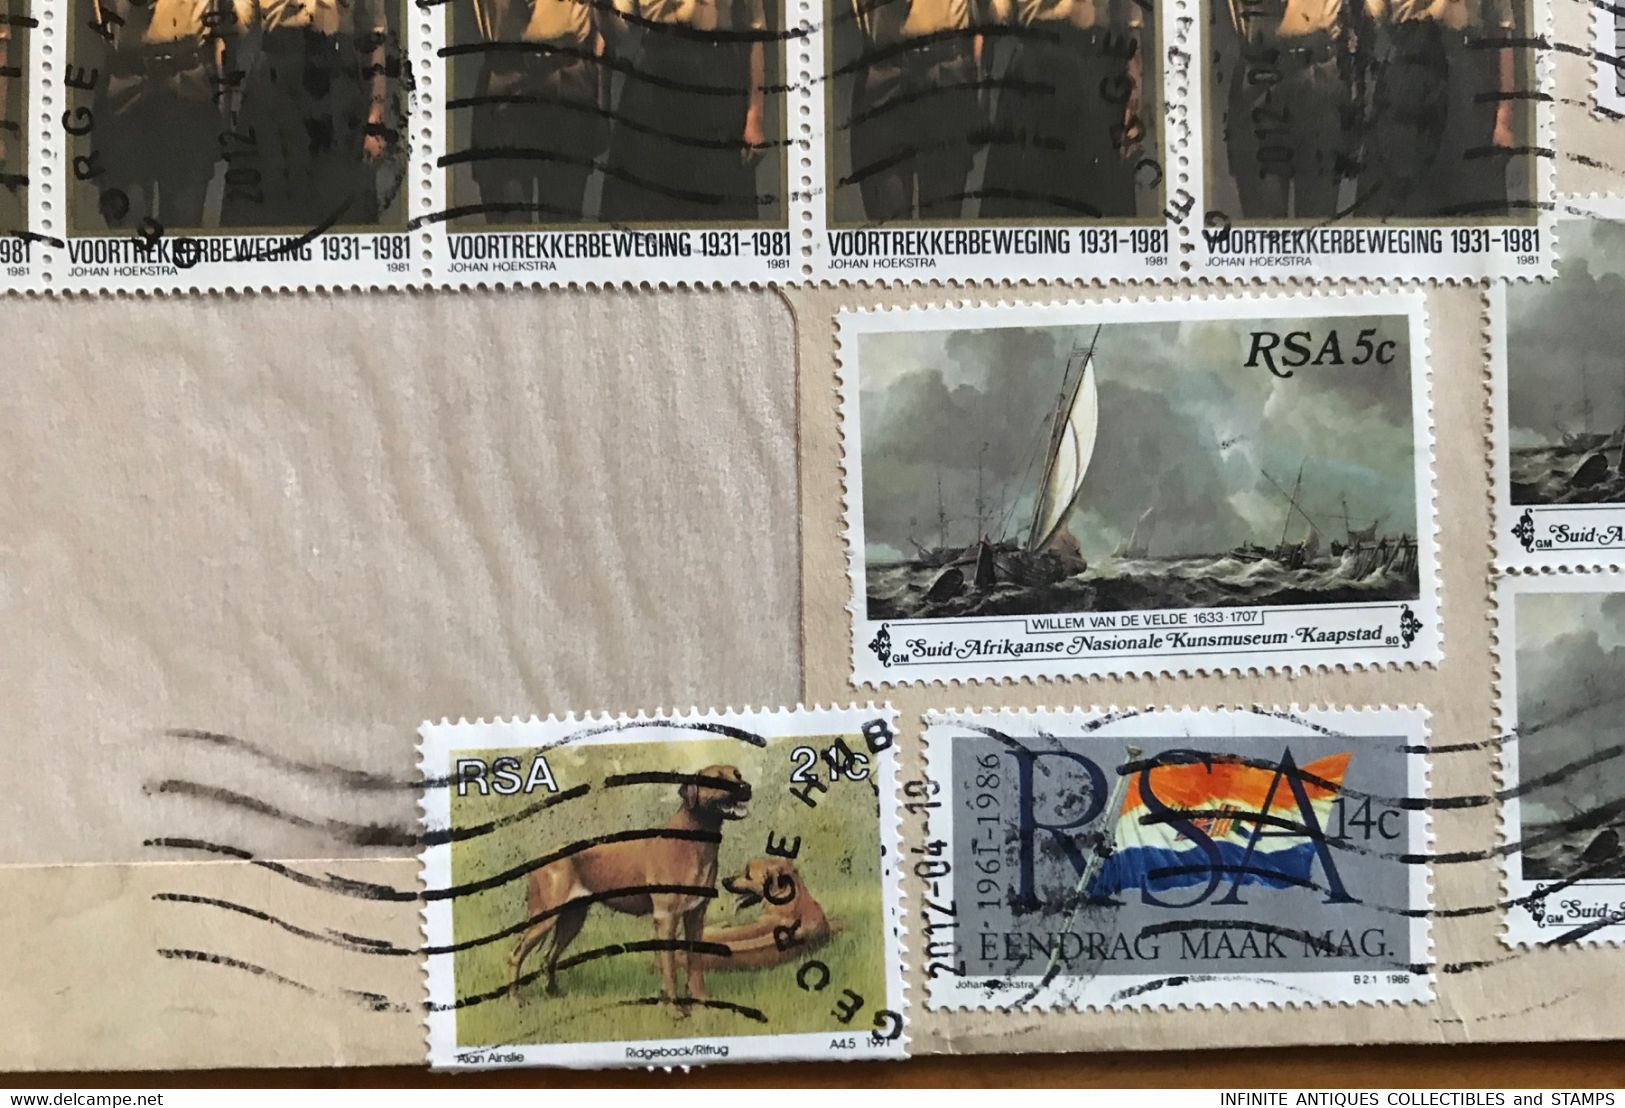 SOUTH AFRICA=LETTER=2012=GEORGE POSTMARK=CDS=CAPE PROVINCE=Mixed Stamps On Cover=BOYSCOUTS=DOG=FLAG=SAILING SHIP=BEADS - Lettres & Documents